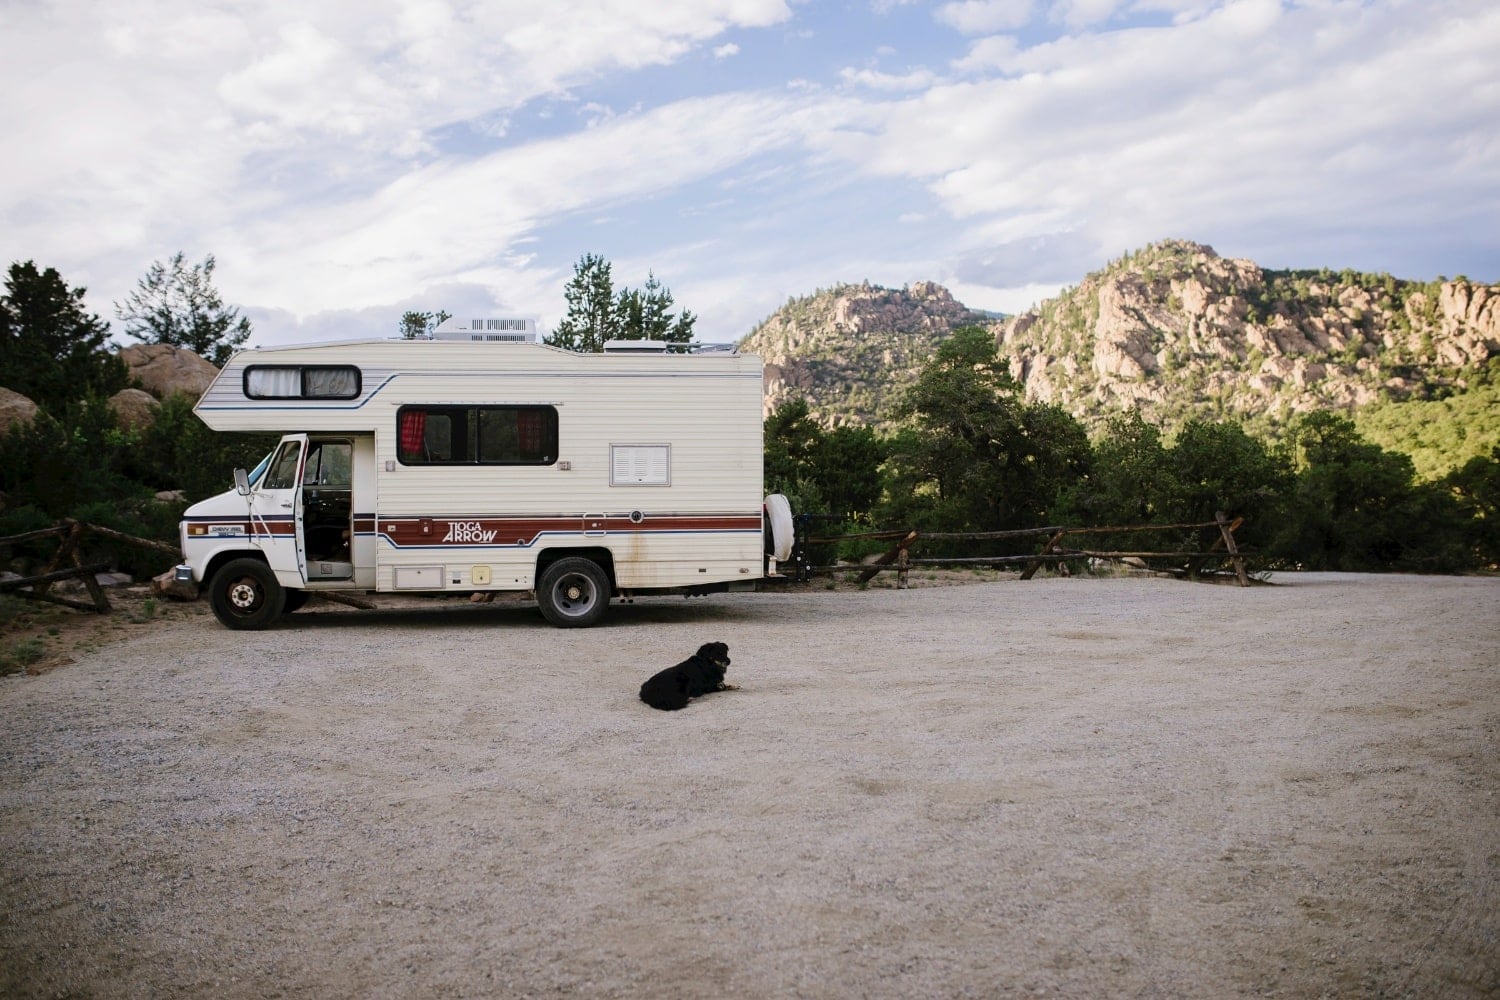 Dog resting on gravel road in front of RV, with mountains in the background, in Buena Vista, Colorado.